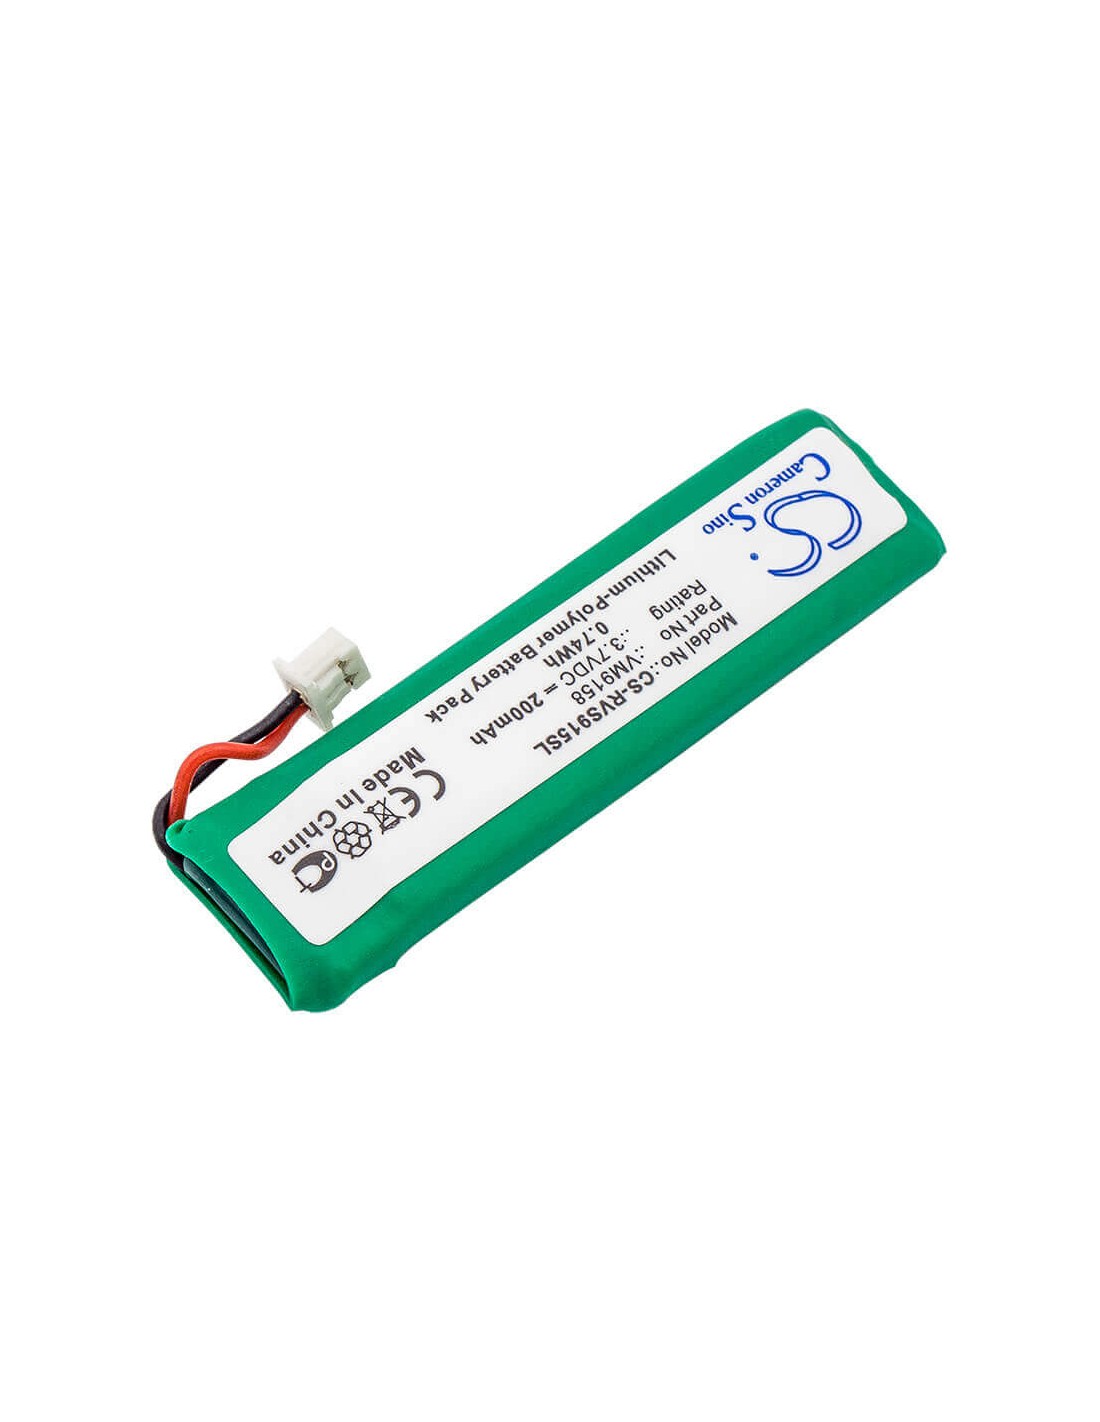 Battery for Revolabs, Solo Field 3.7V, 200mAh - 0.74Wh